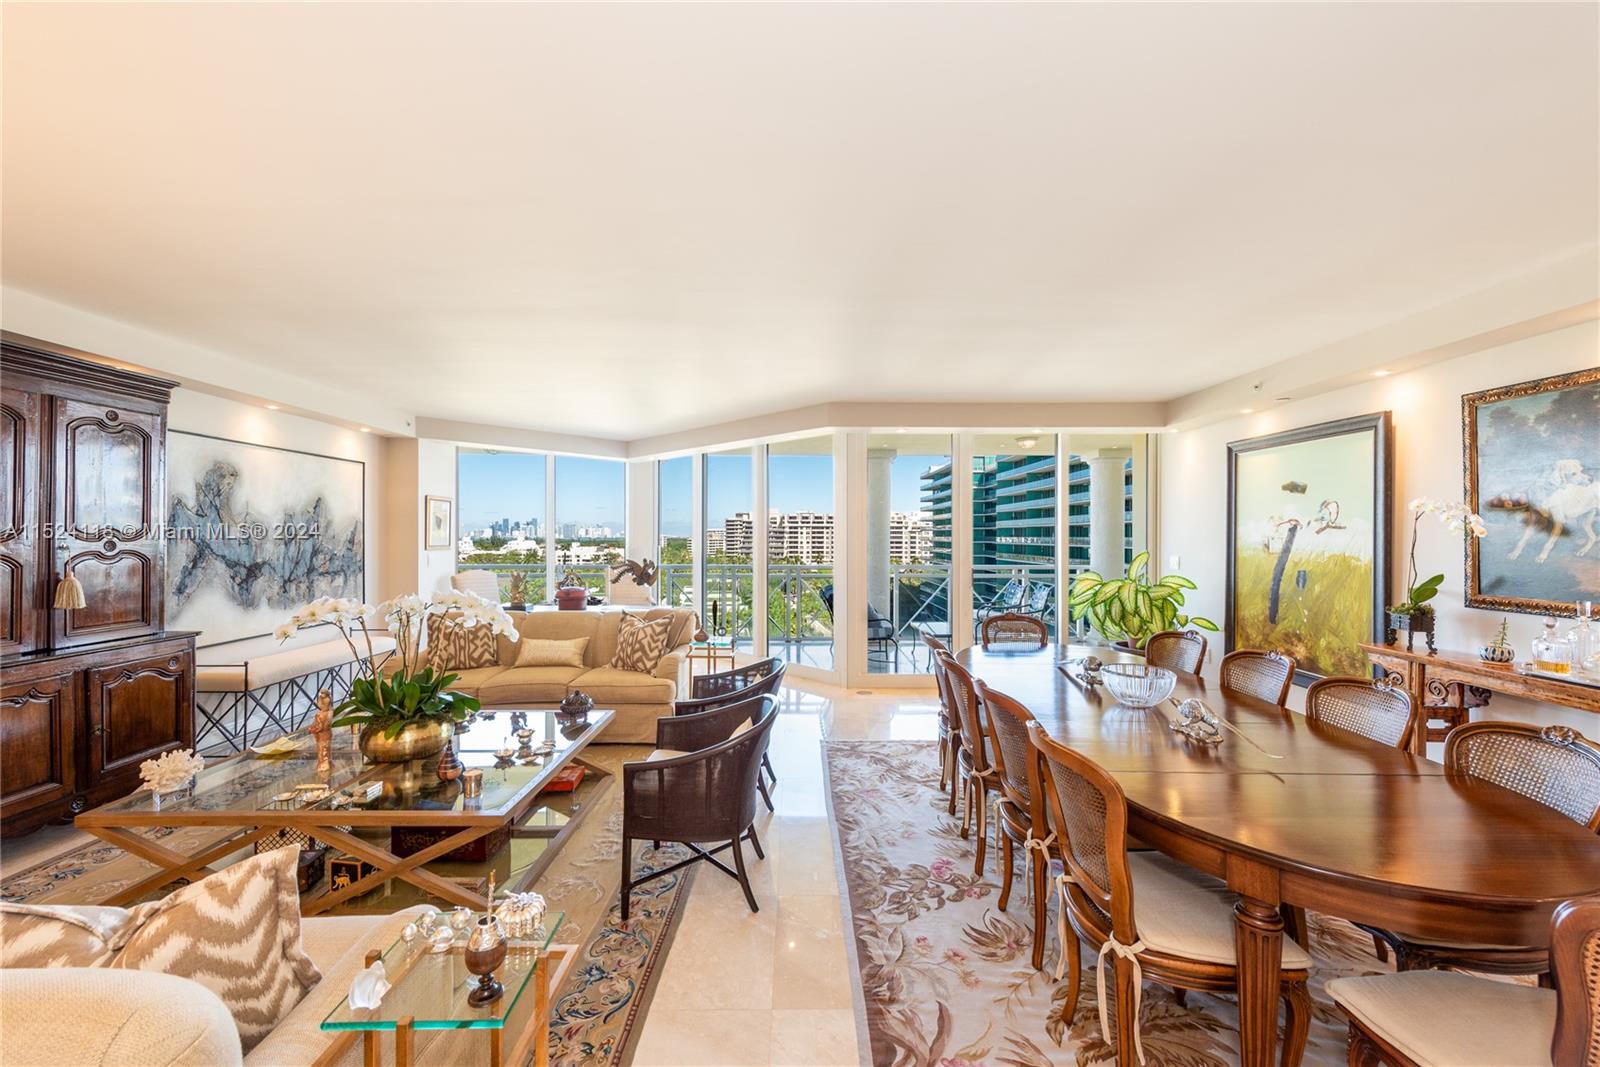 Experience classic elegance with breathtaking Miami skyline views in this exquisite residence at the Grand Bay Towers, located on the gated grounds of The Ritz-Carlton Key Biscayne. Nicely remodeled & meticulously maintained, this move-in-ready home is ideal for a large family, offering 3 bedrooms plus den, each with its own bathroom, a spacious 2,950 SF layout. The private elevator, chef-style kitchen, oversized master suite & covered terrace for al fresco dining all enhance the luxury feel. Enjoy the recently renovated lobby & resort-style amenities, including tennis courts, beach access, pool, valet, & lush tropical grounds.It's upscale island living just a short drive from the vibrant scene on Brickell, Coconut Grove, & Miami Beach.Live the epitome of luxury in this stunning residence.